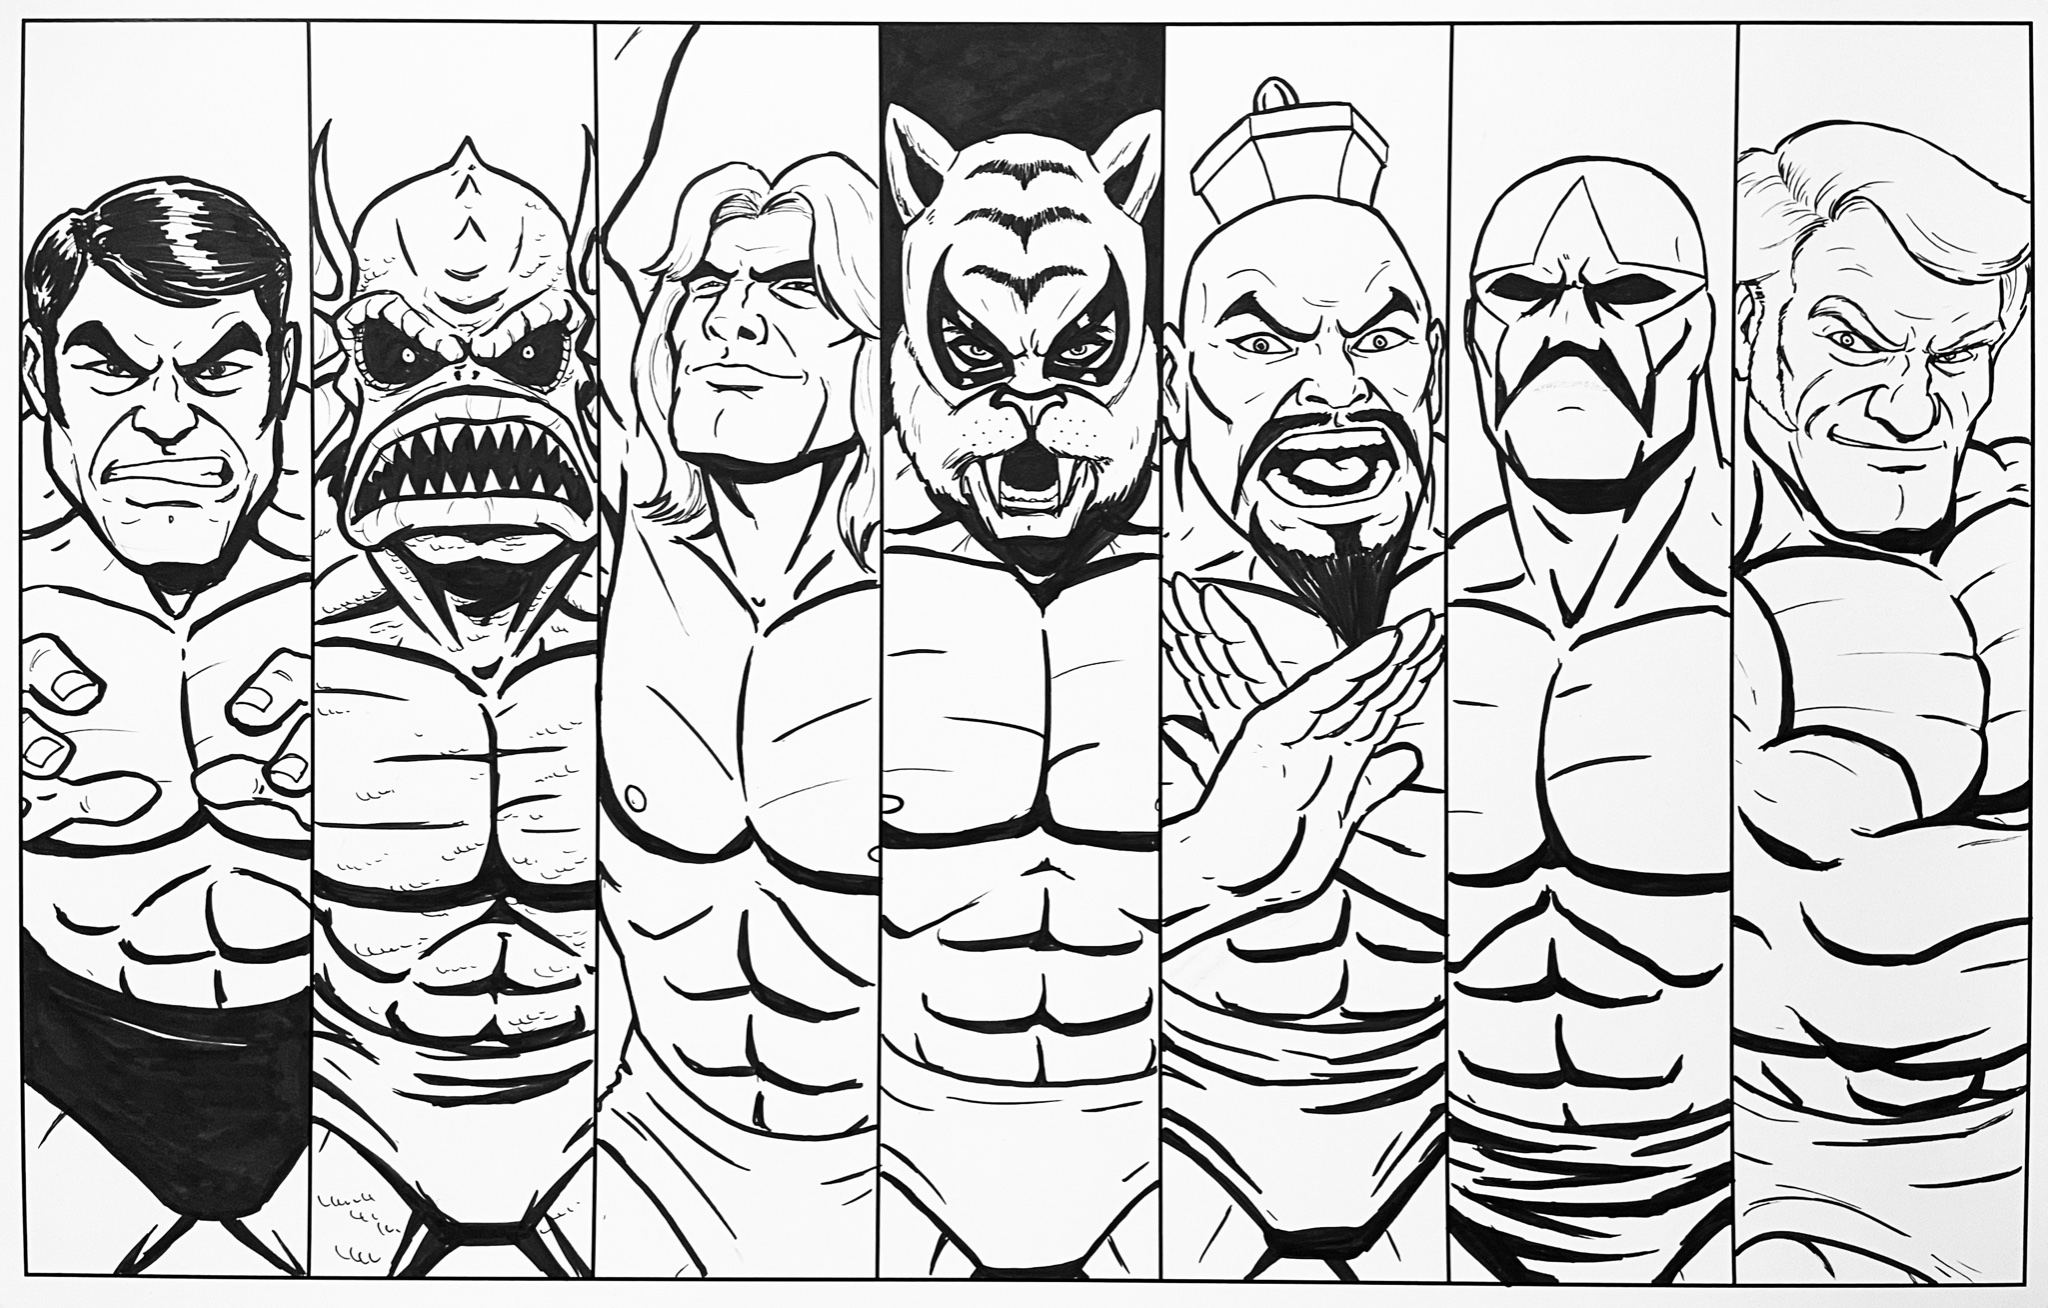 Hal Haney on X: "NES Pro Wrestling 7-Panel - Finished inks! Got the urge to  do some art for this classic NES game in my style, so here's Fighter  Hayabusa, Amazon, King